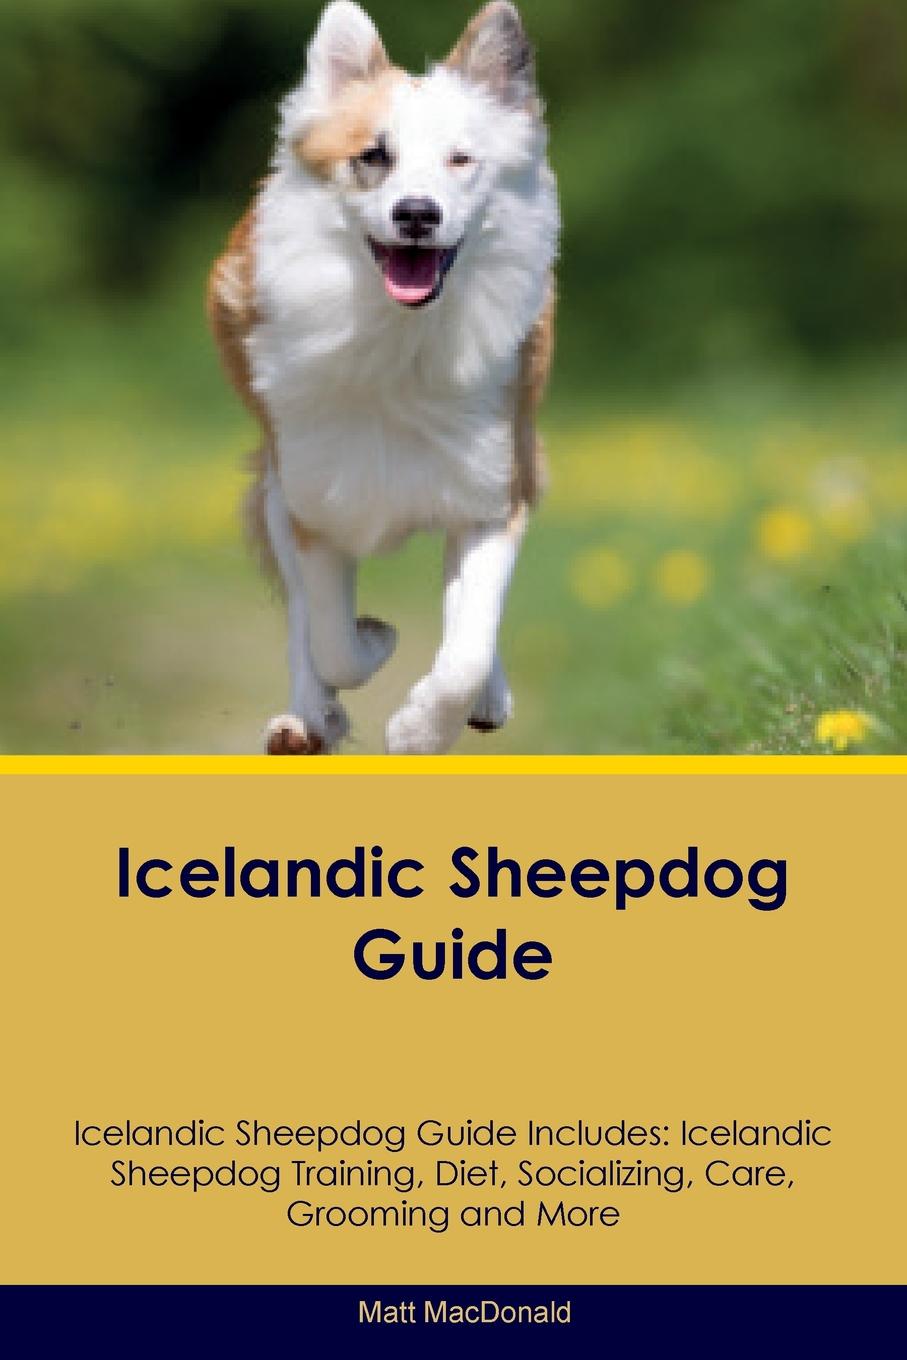 Icelandic Sheepdog Guide Icelandic Sheepdog Guide Includes. Icelandic Sheepdog Training, Diet, Socializing, Care, Grooming, Breeding and More